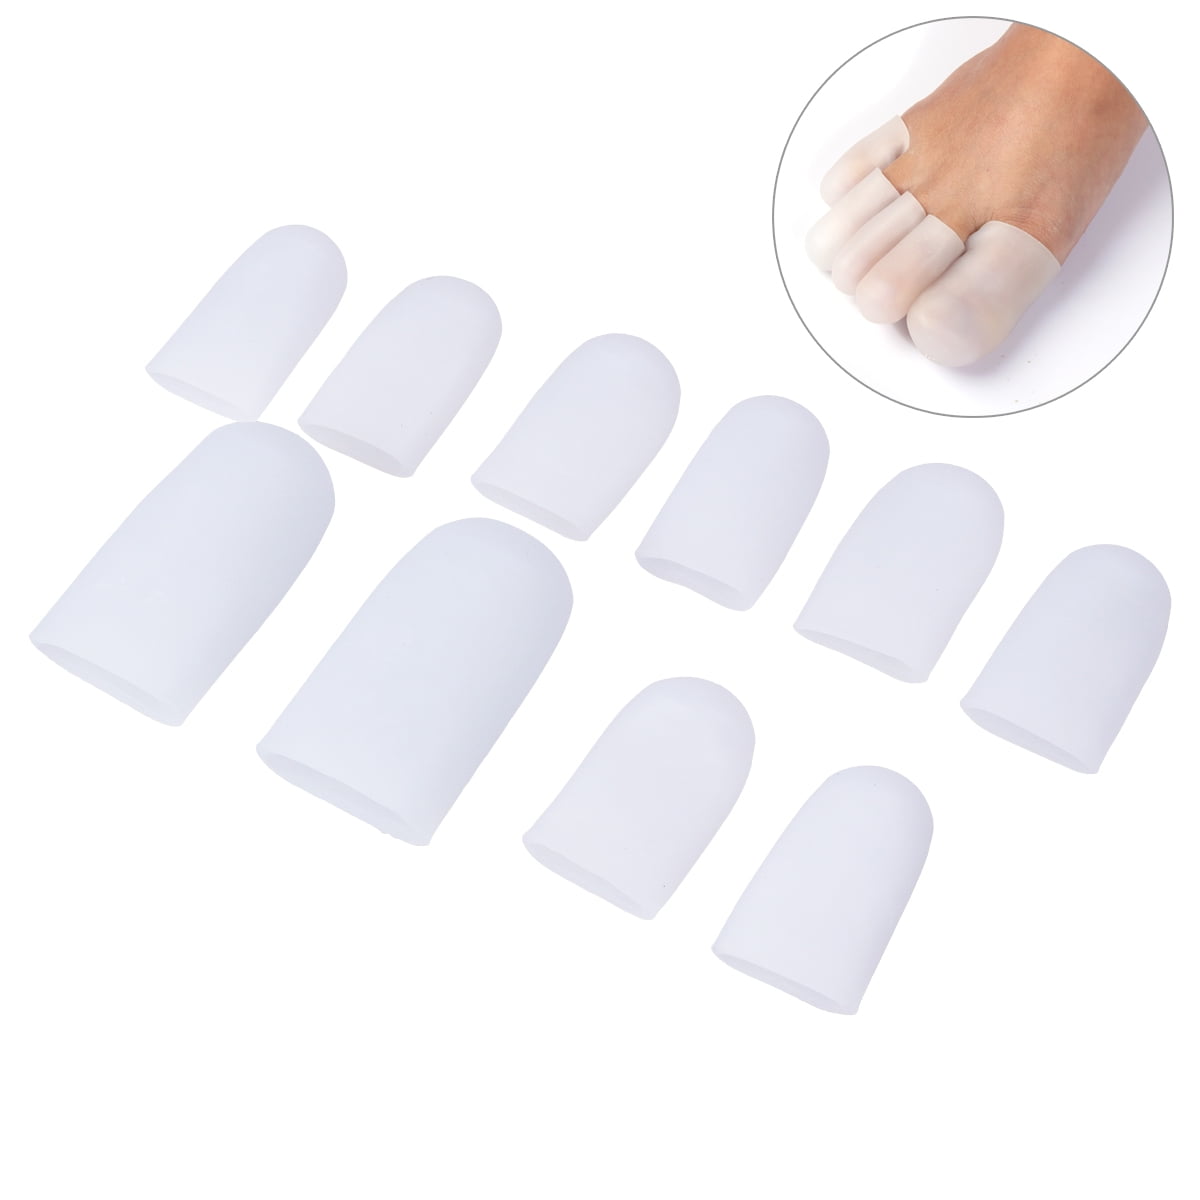 1 Pairs Gel Silicone Soft Toe Cap Protector Cover for Blisters Pain Relief Case 